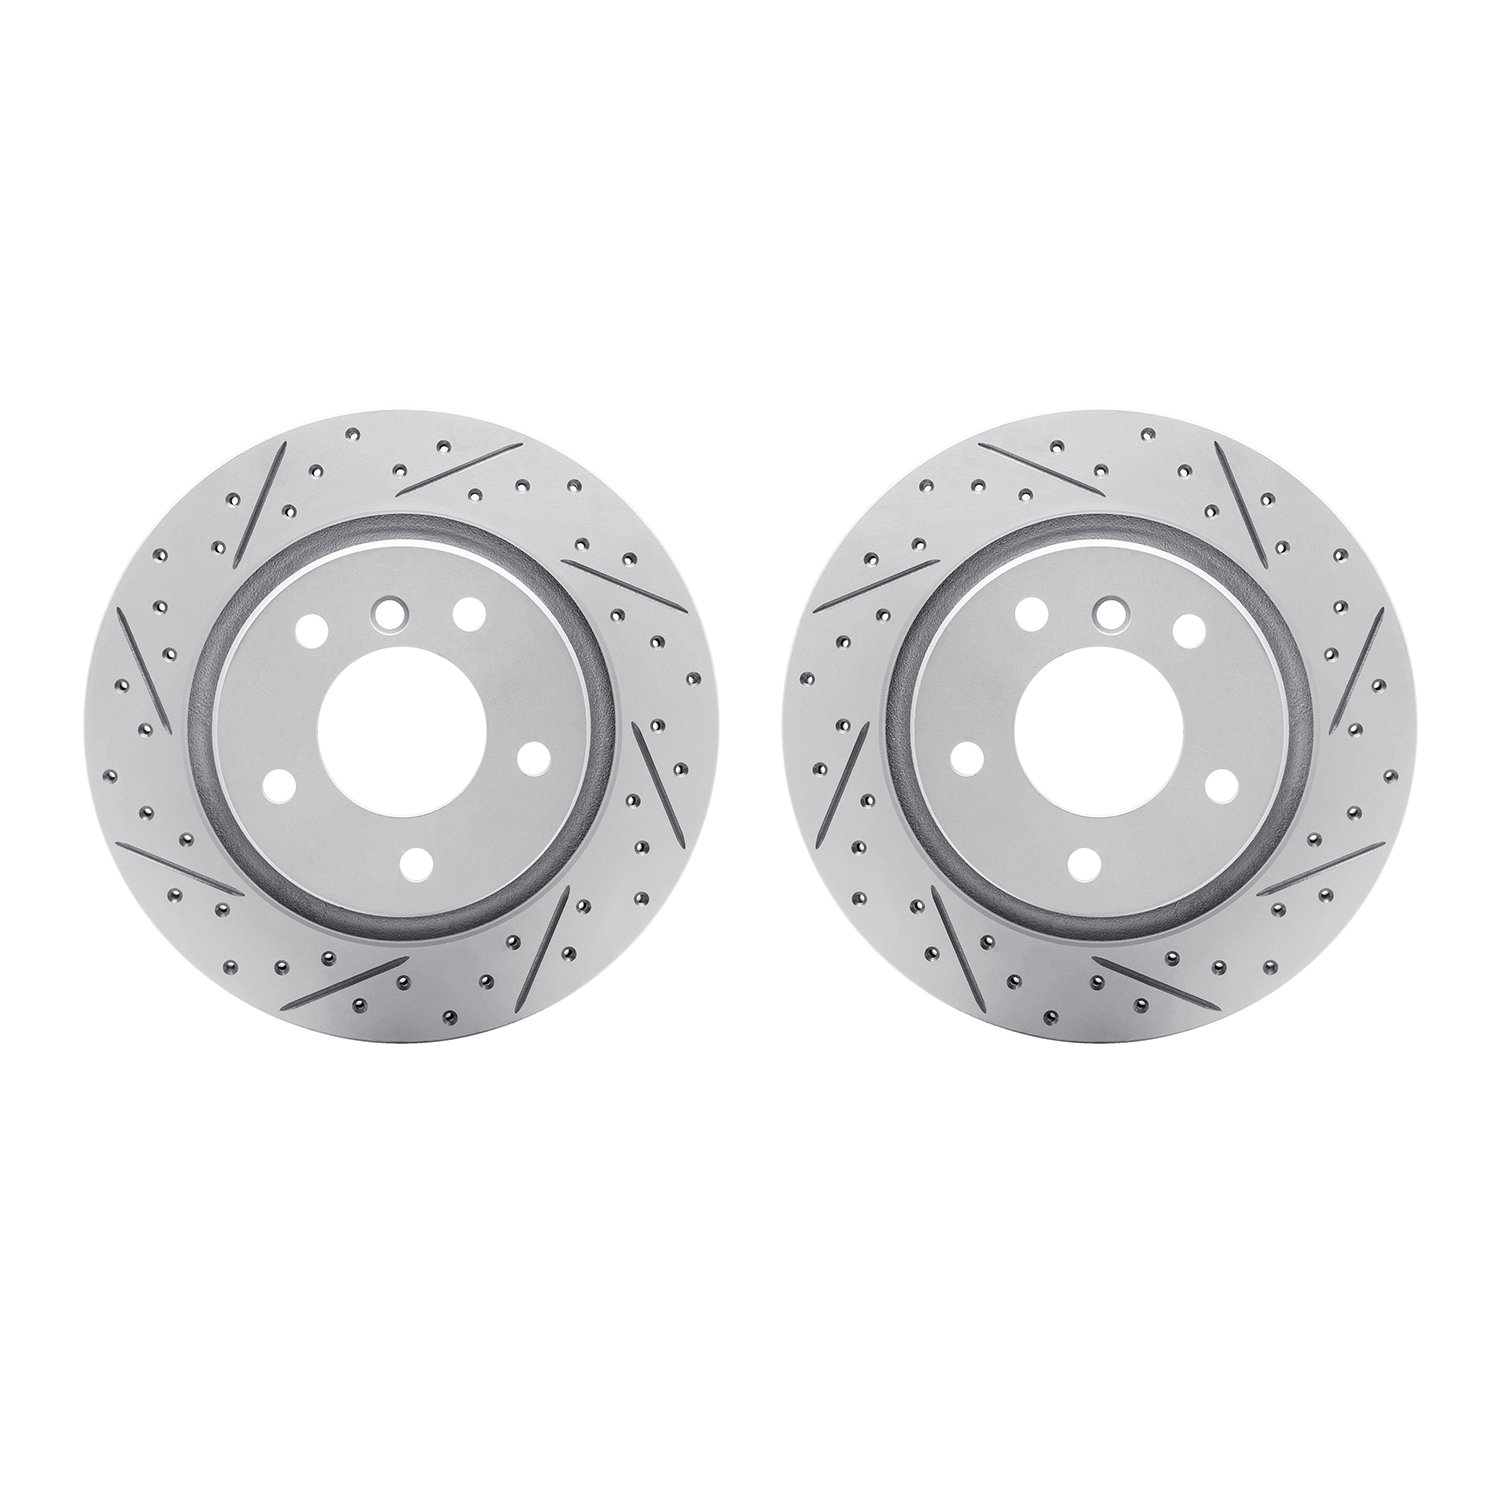 2002-31063 Geoperformance Drilled/Slotted Brake Rotors, 1999-2006 BMW, Position: Rear